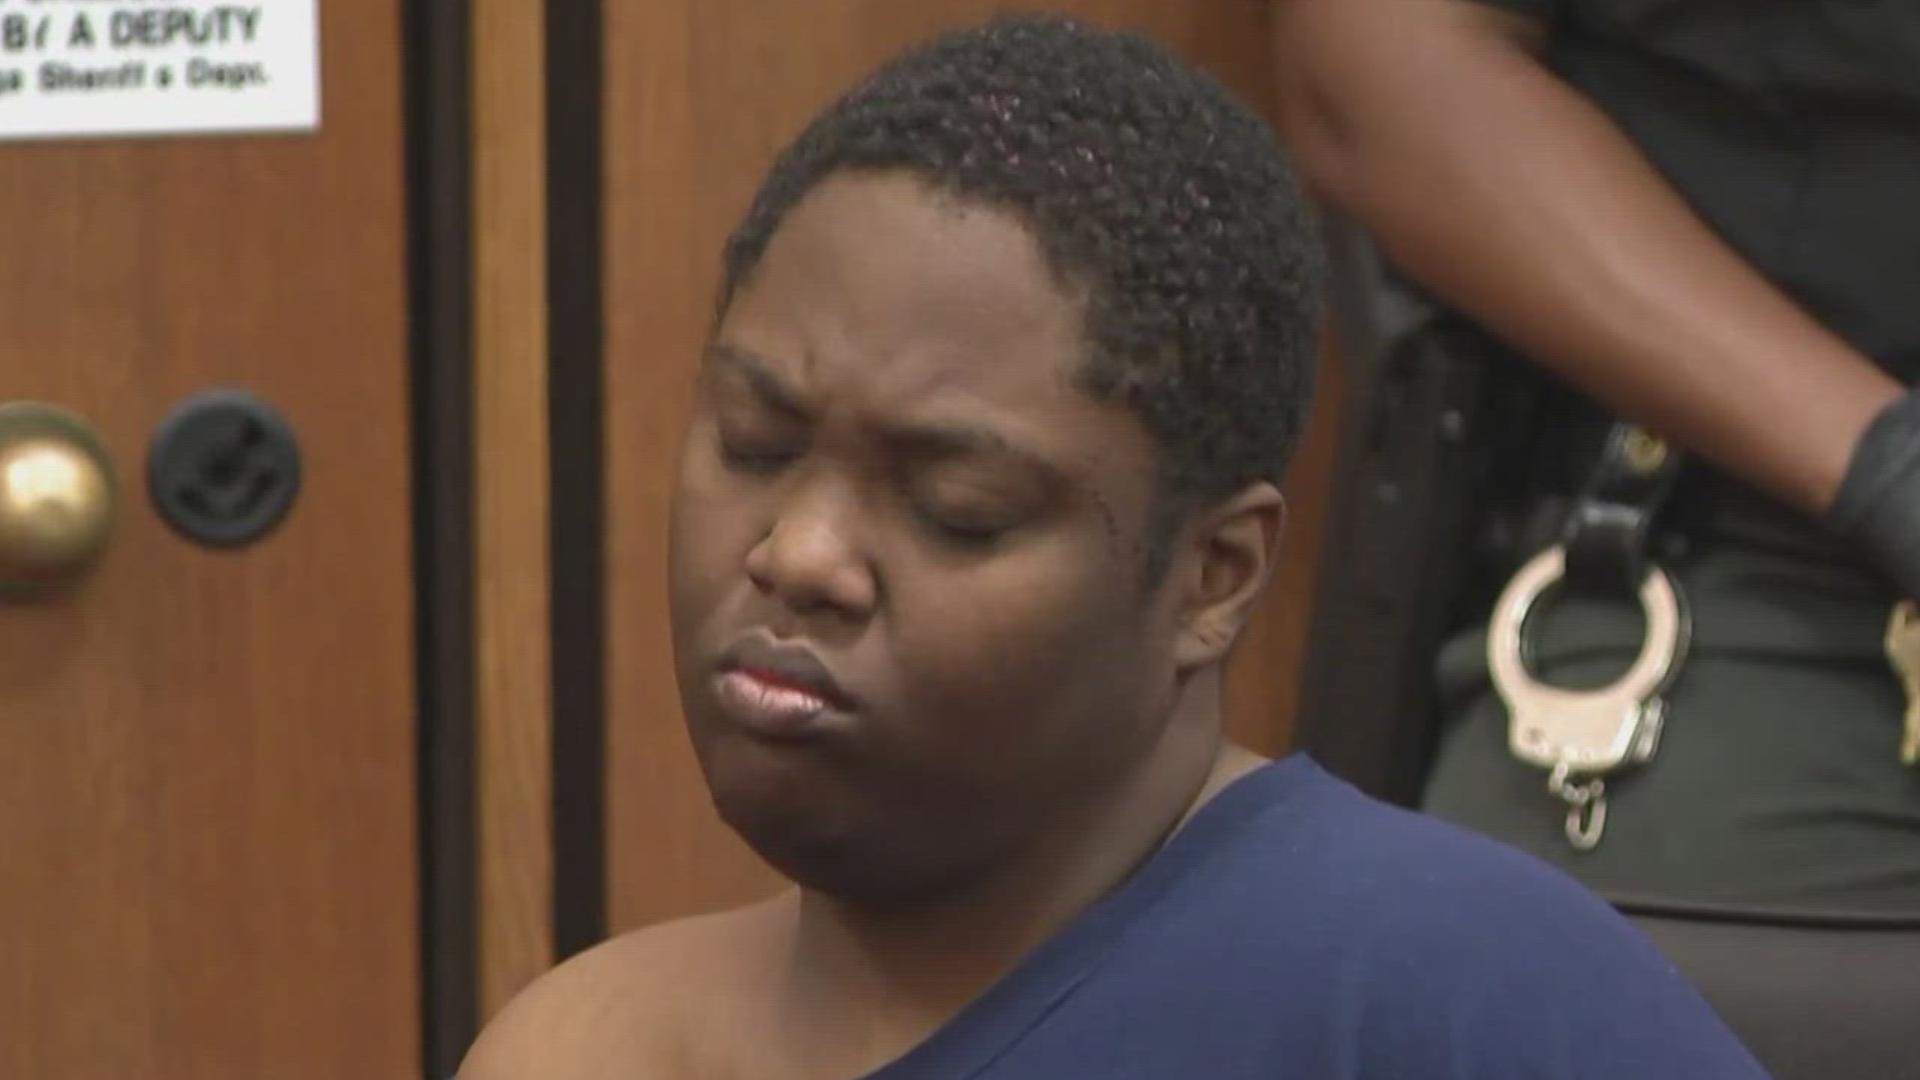 Bionca Ellis, the 33-year-old woman accused of killing 3-year-old Julian Wood in a double stabbing outside of a Giant Eagle in North Olmsted, is back in court.